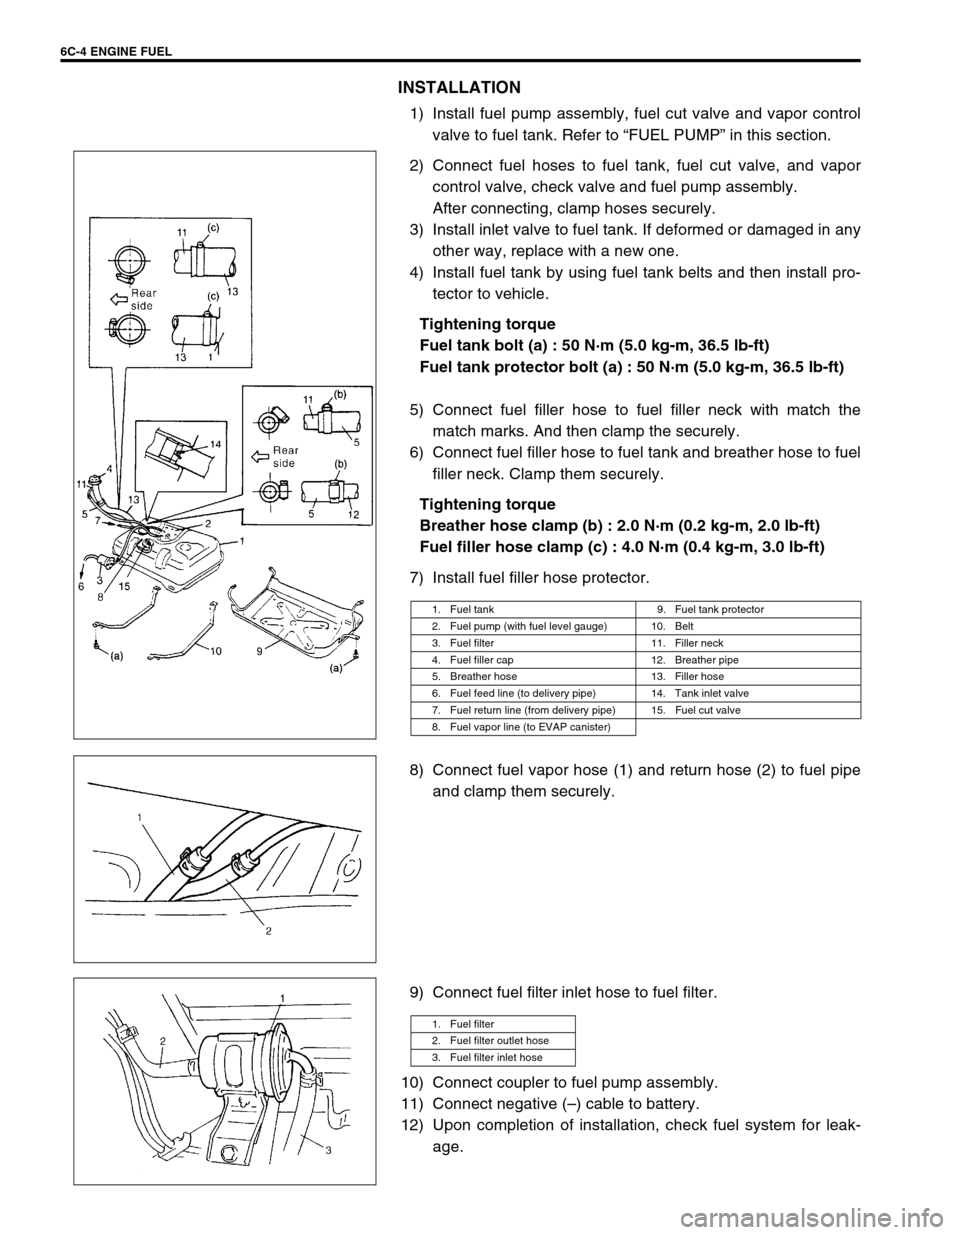 SUZUKI GRAND VITARA 2001 2.G Owners Manual 6C-4 ENGINE FUEL
INSTALLATION
1) Install fuel pump assembly, fuel cut valve and vapor control
valve to fuel tank. Refer to “FUEL PUMP” in this section.
2) Connect fuel hoses to fuel tank, fuel cut